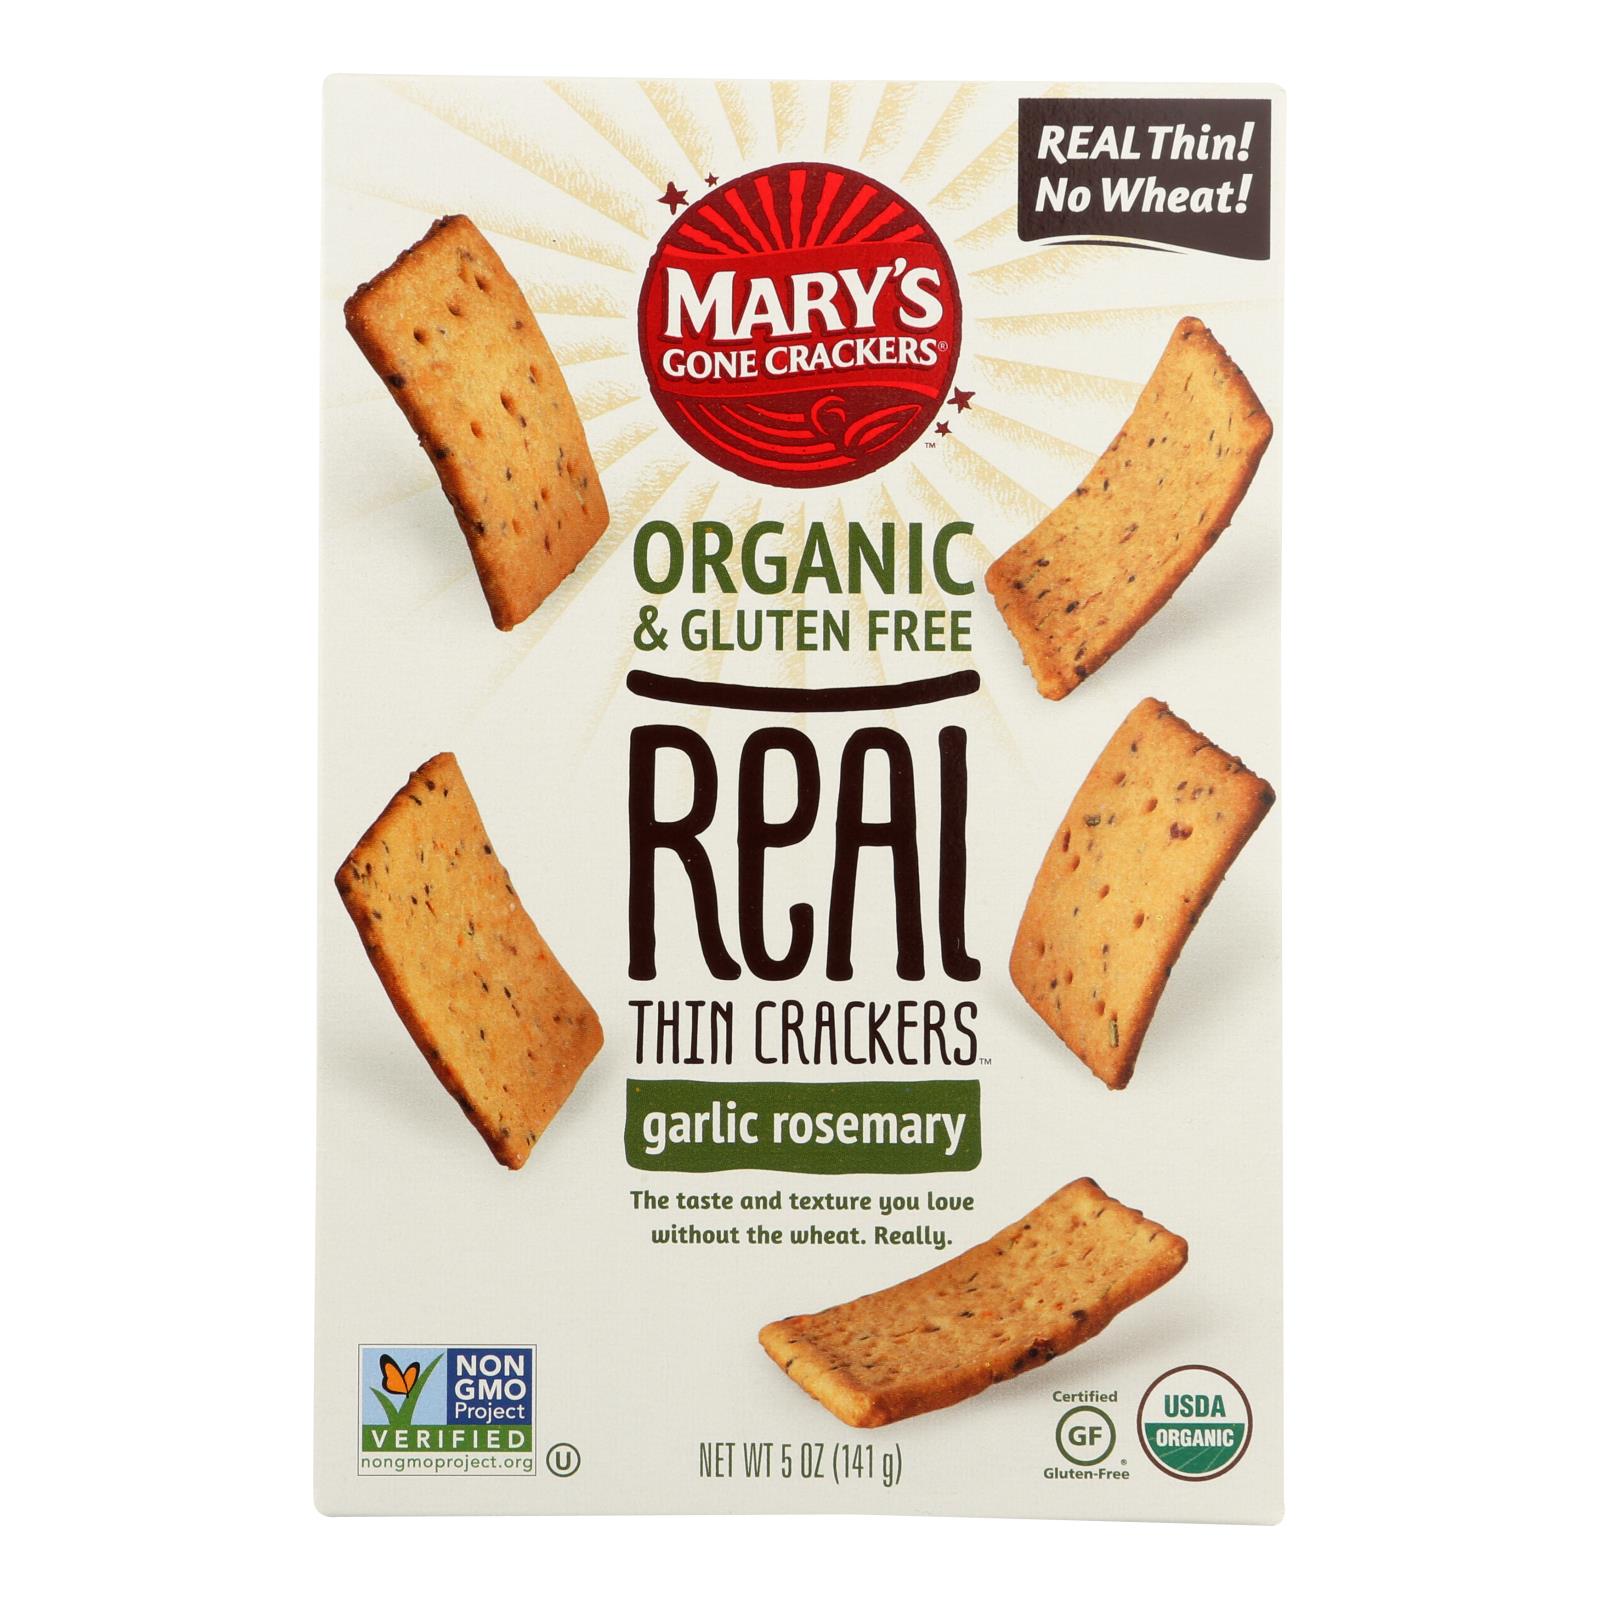 Mary's Gone Crackers Organic & Gluten Free Real Thin Crackers - 6개 묶음상품 - 5 OZ